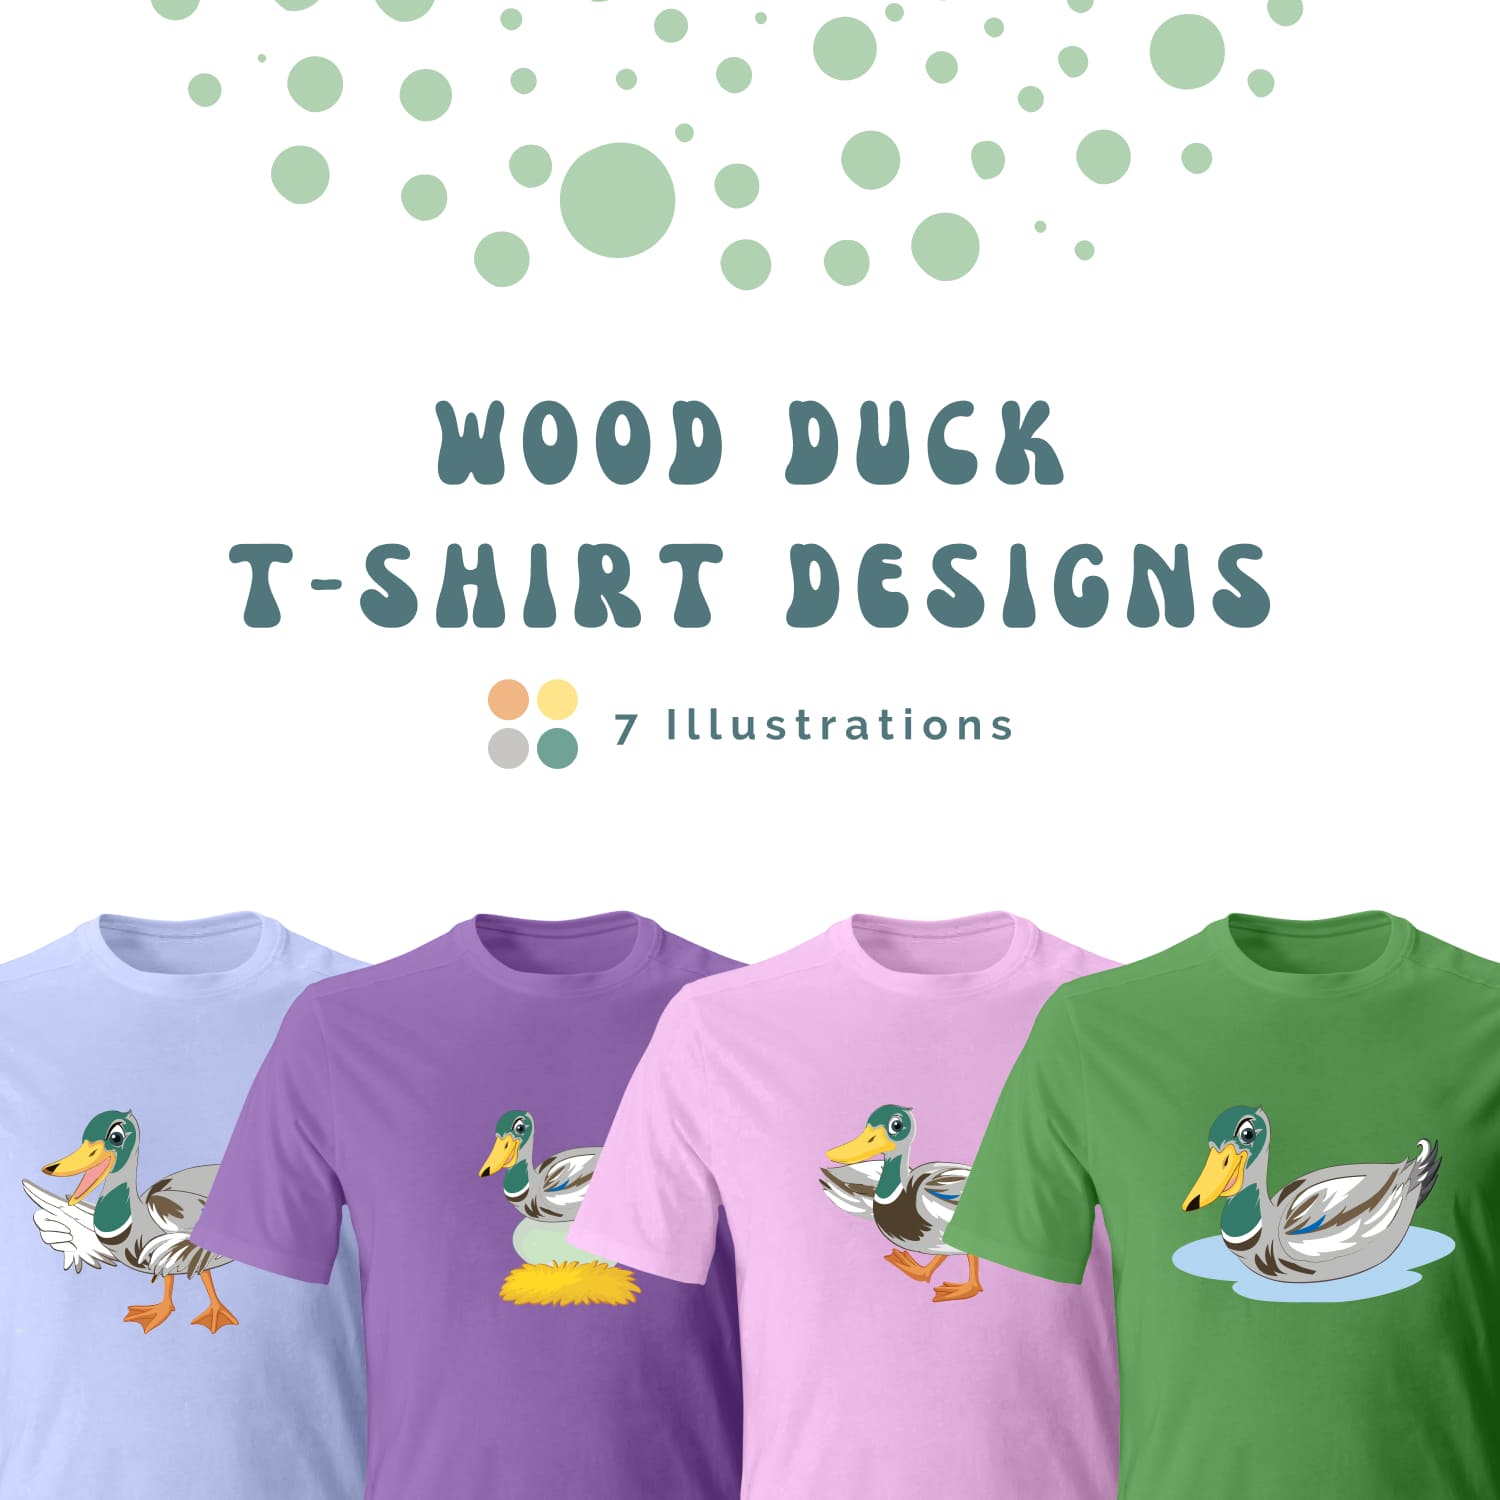 Collection of t-shirt images with enchanting wood duck prints.